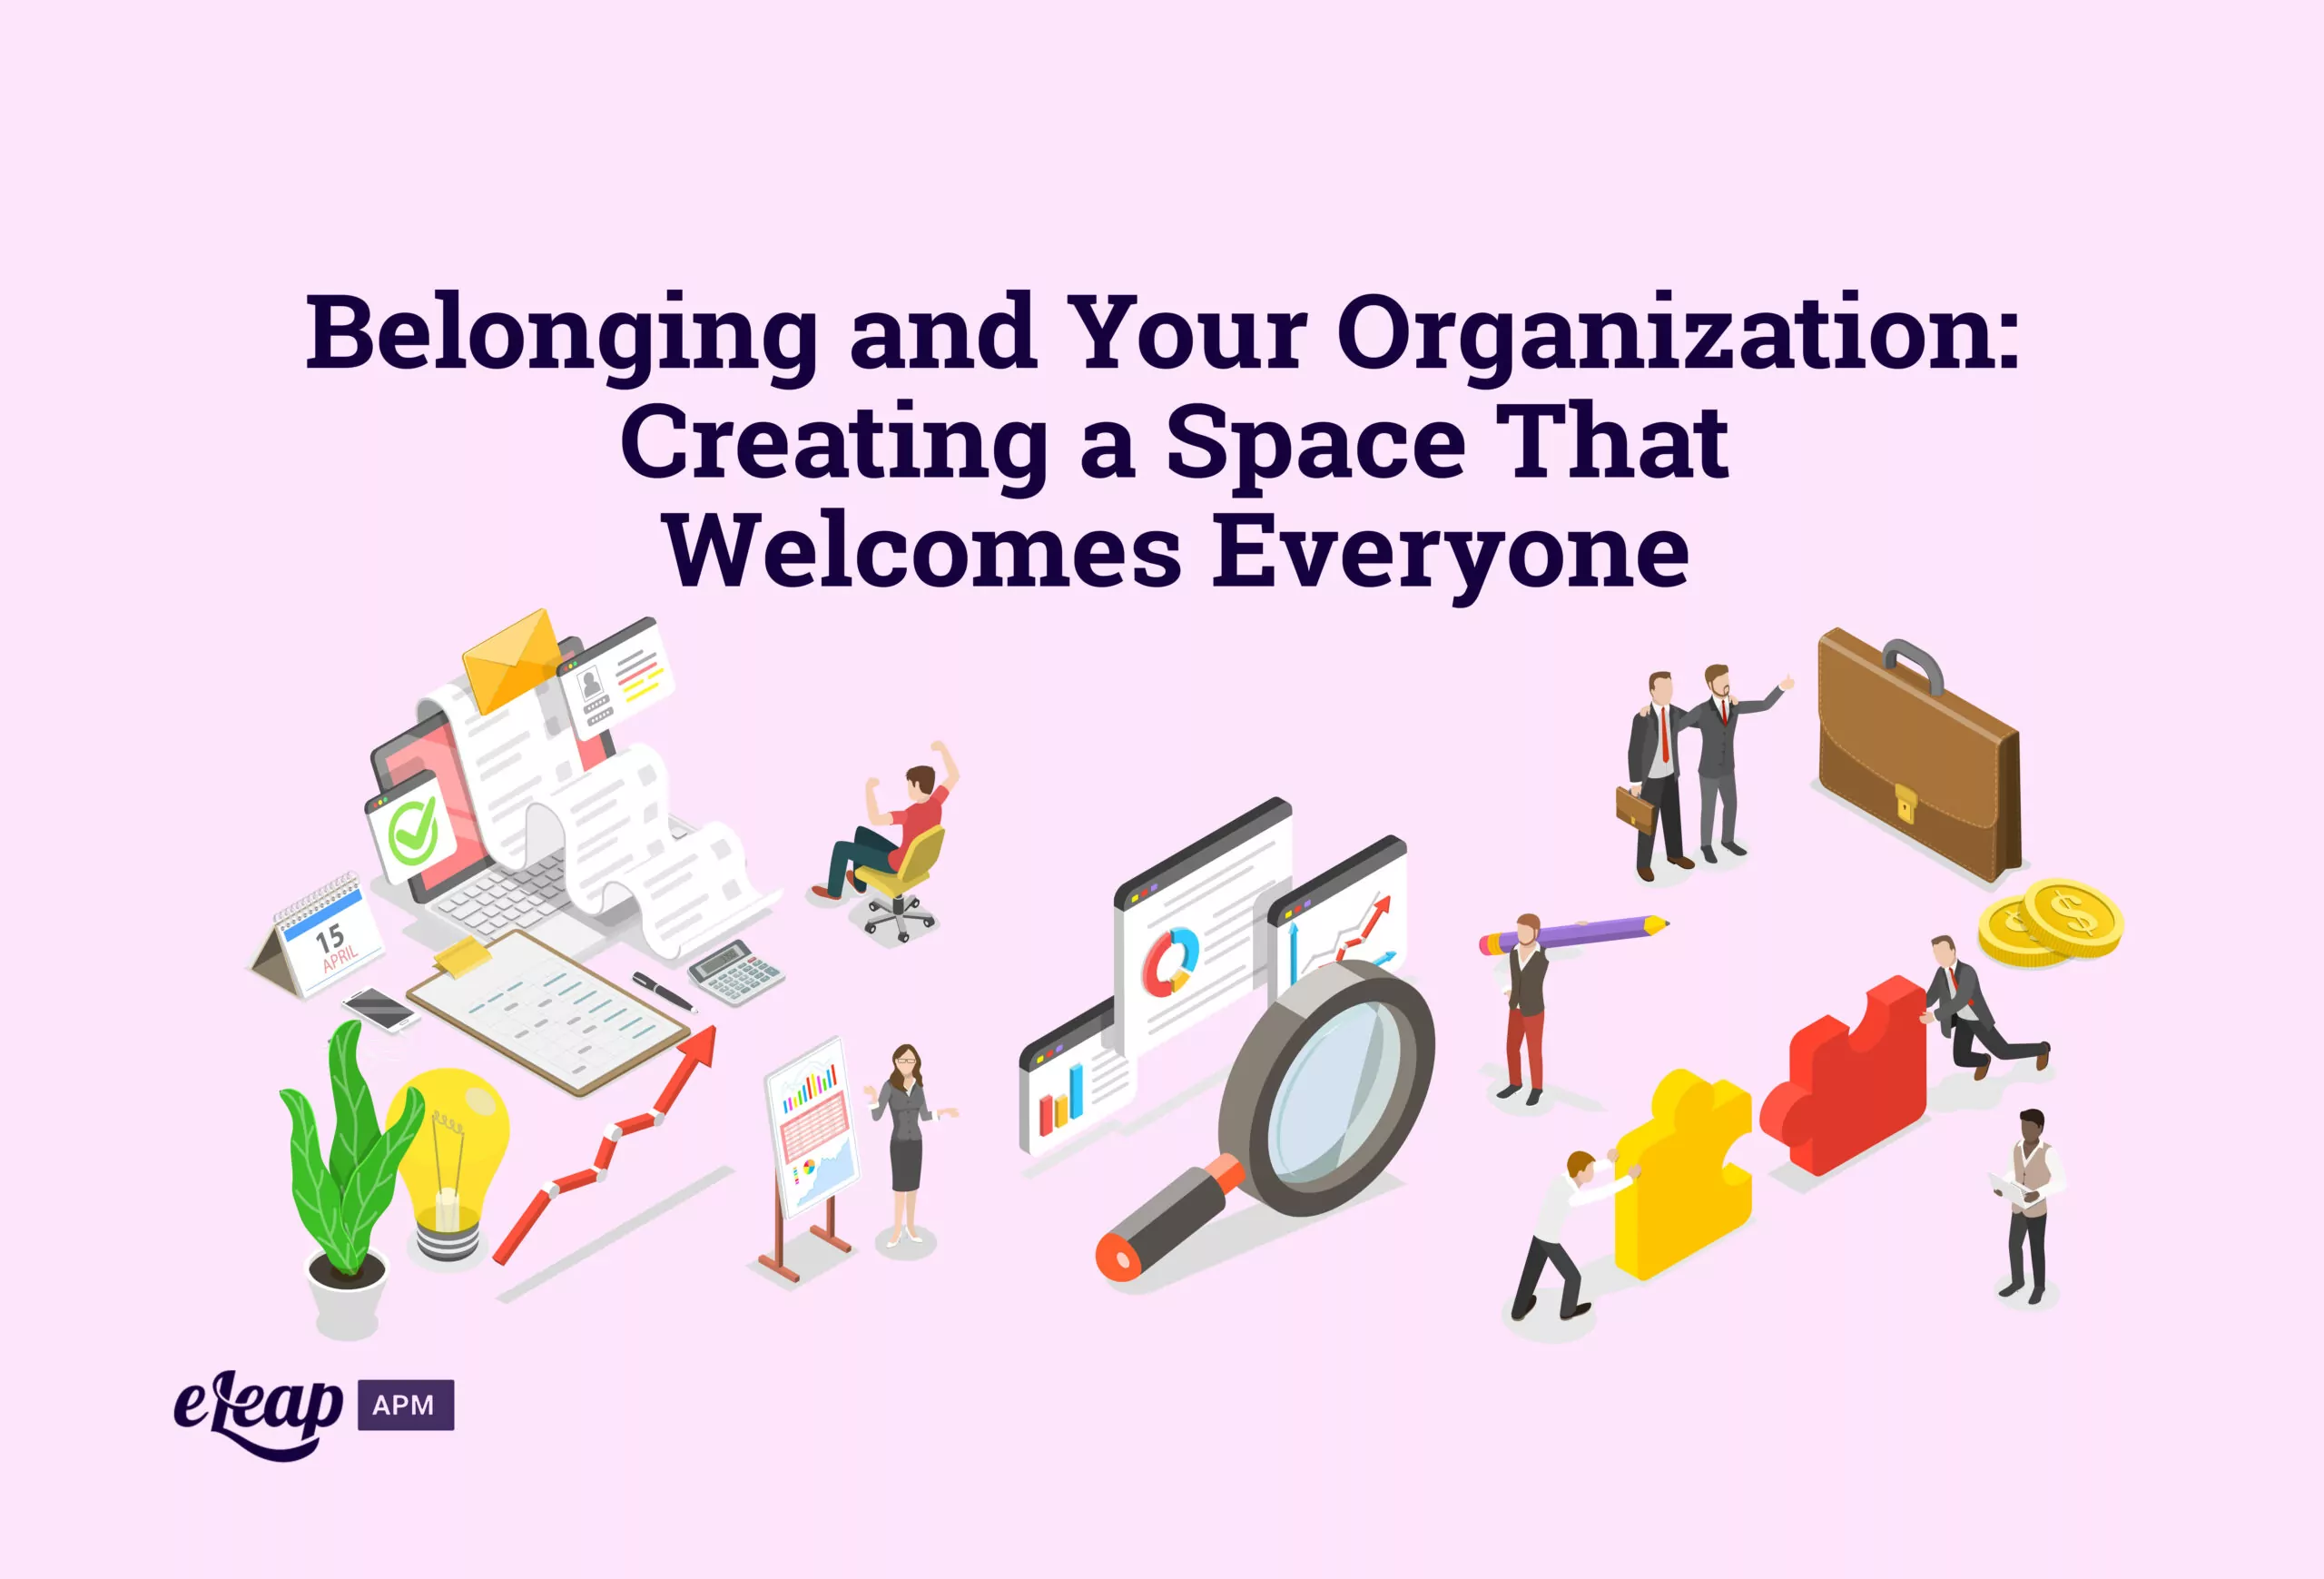 Belonging and Your Organization: Creating a Space That Welcomes Everyone